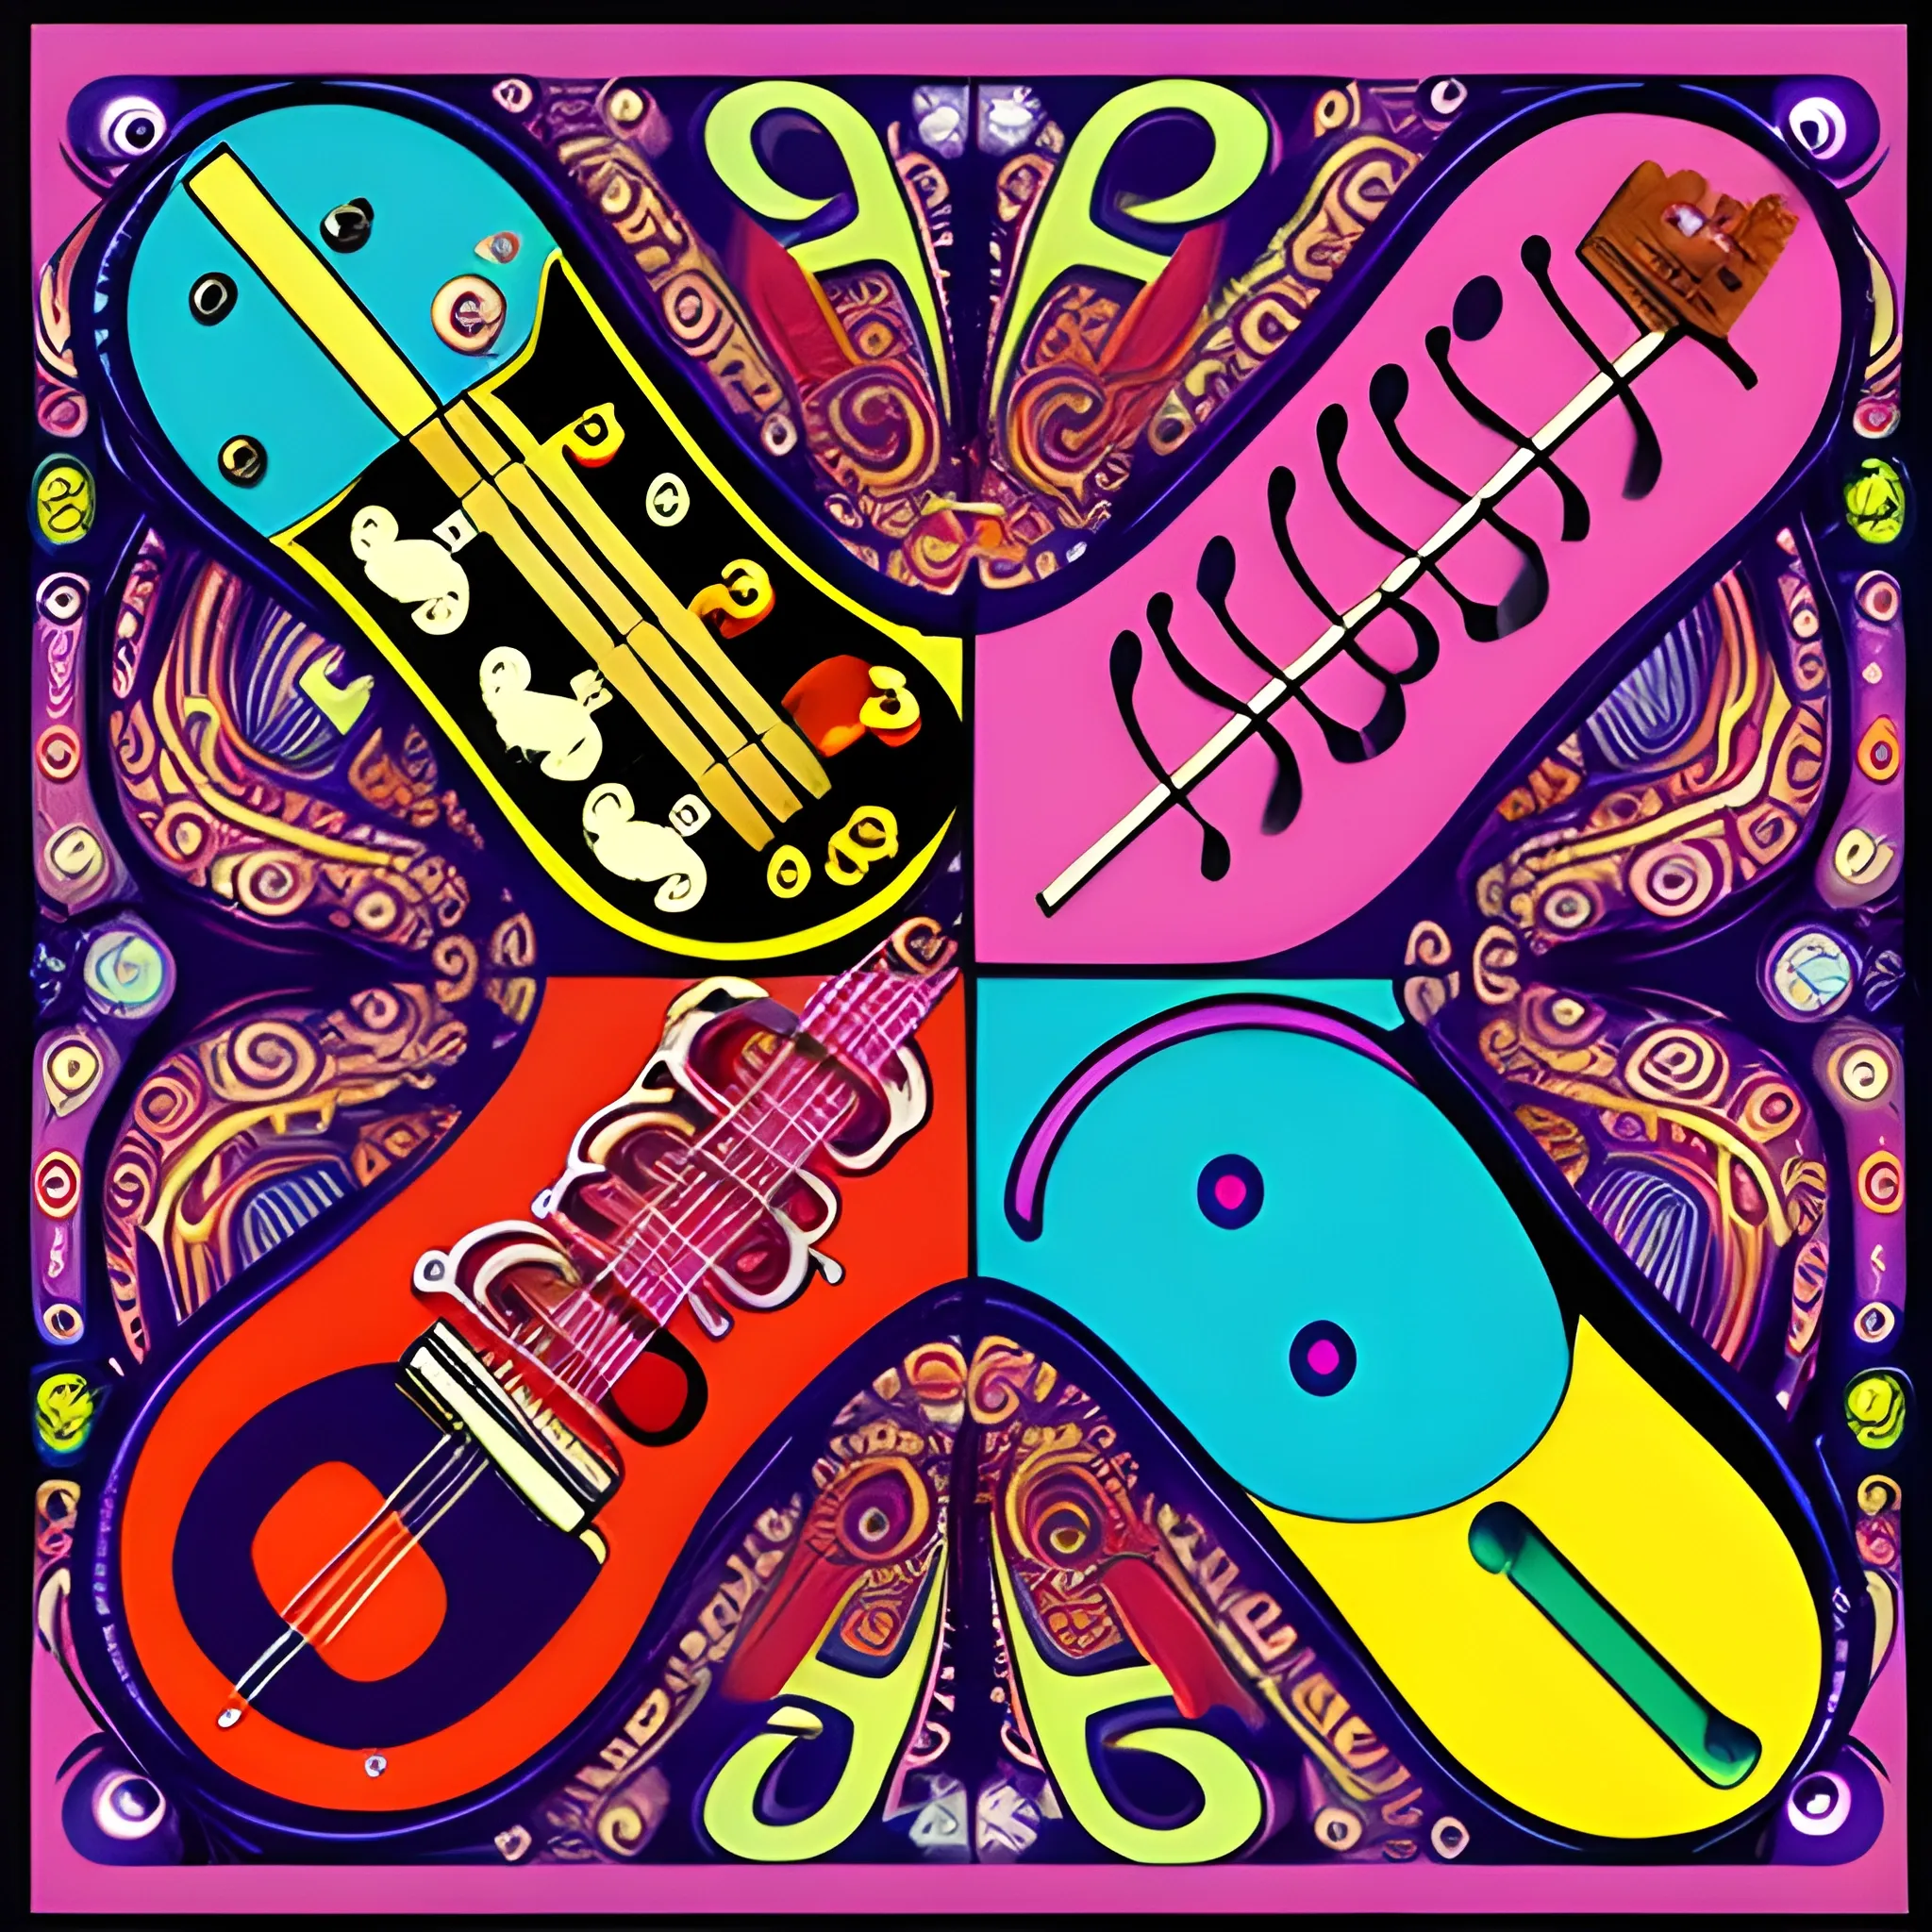 Groovy, psychedelic, 60's, alphabet letters, guitar
